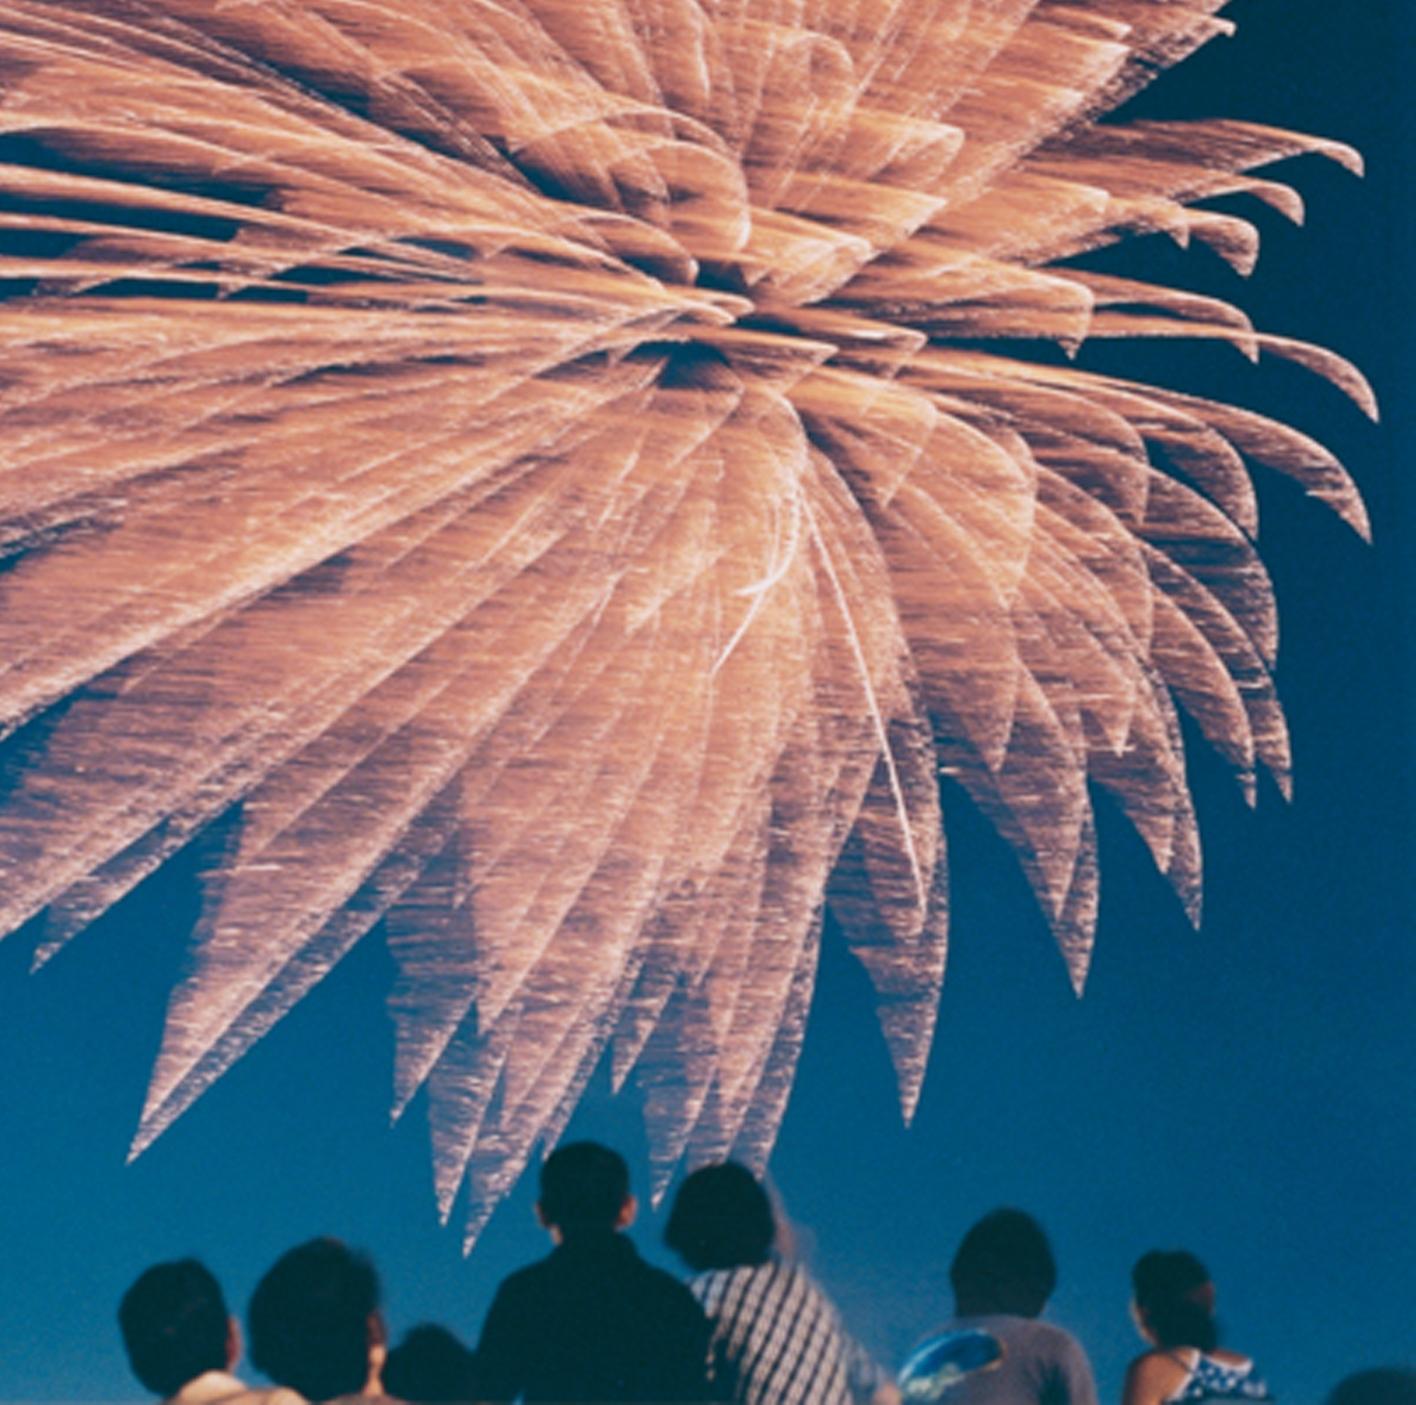 RINKO KAWAUCHI (*1972, Japan)
Untitled, from the series 'Hanabi'
2001
C–type print
Sheet 25.4 x 20.3 cm (10 x 8 in.)
Edition of 6; Ed. no. 6/6 (last available edition)
framed

Reminiscent of Japanese photography of the 1960s Rinko Kawauchi’s work is